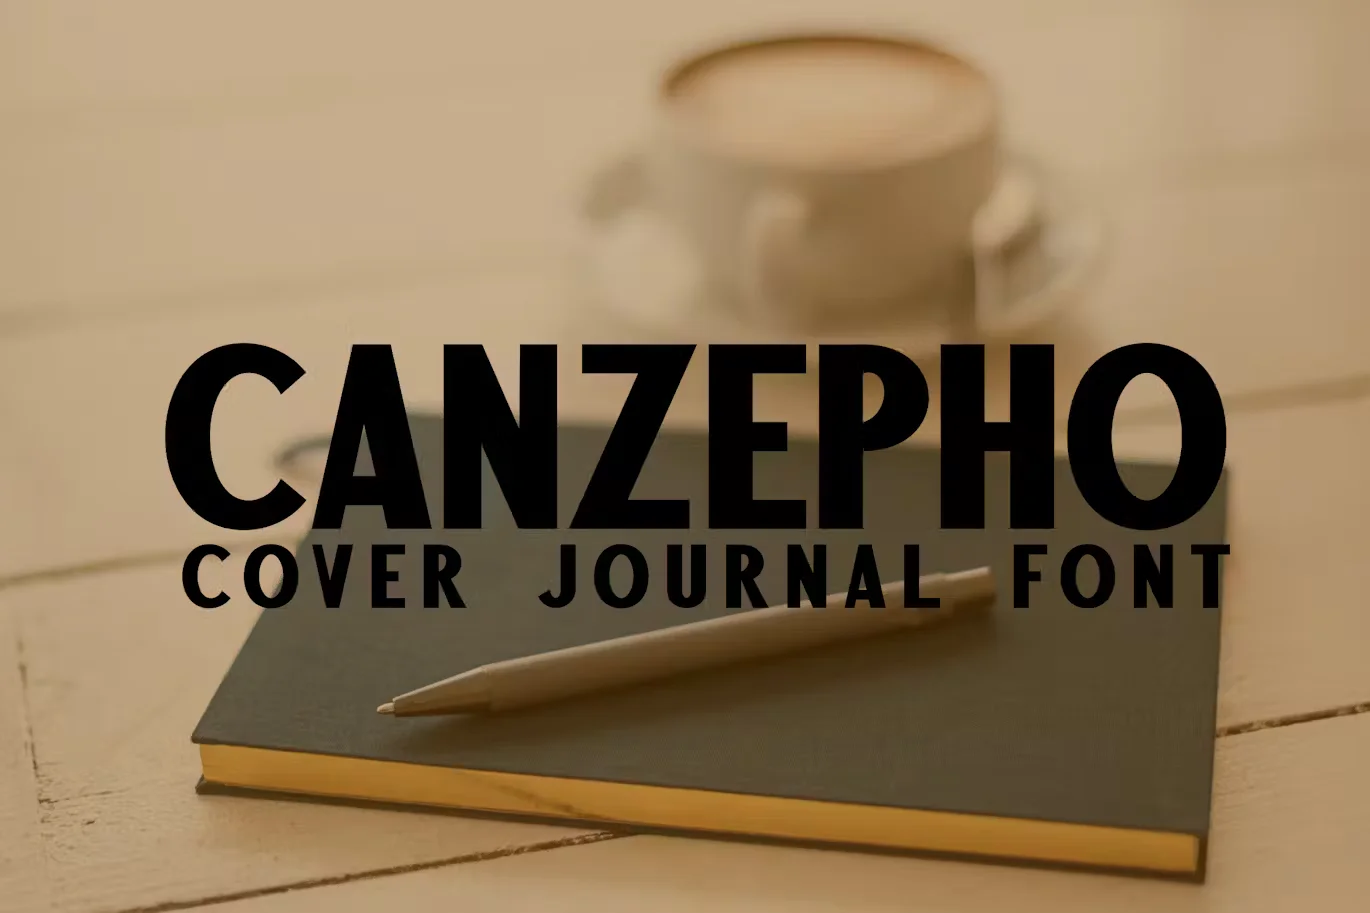 Canzepho Cover Font